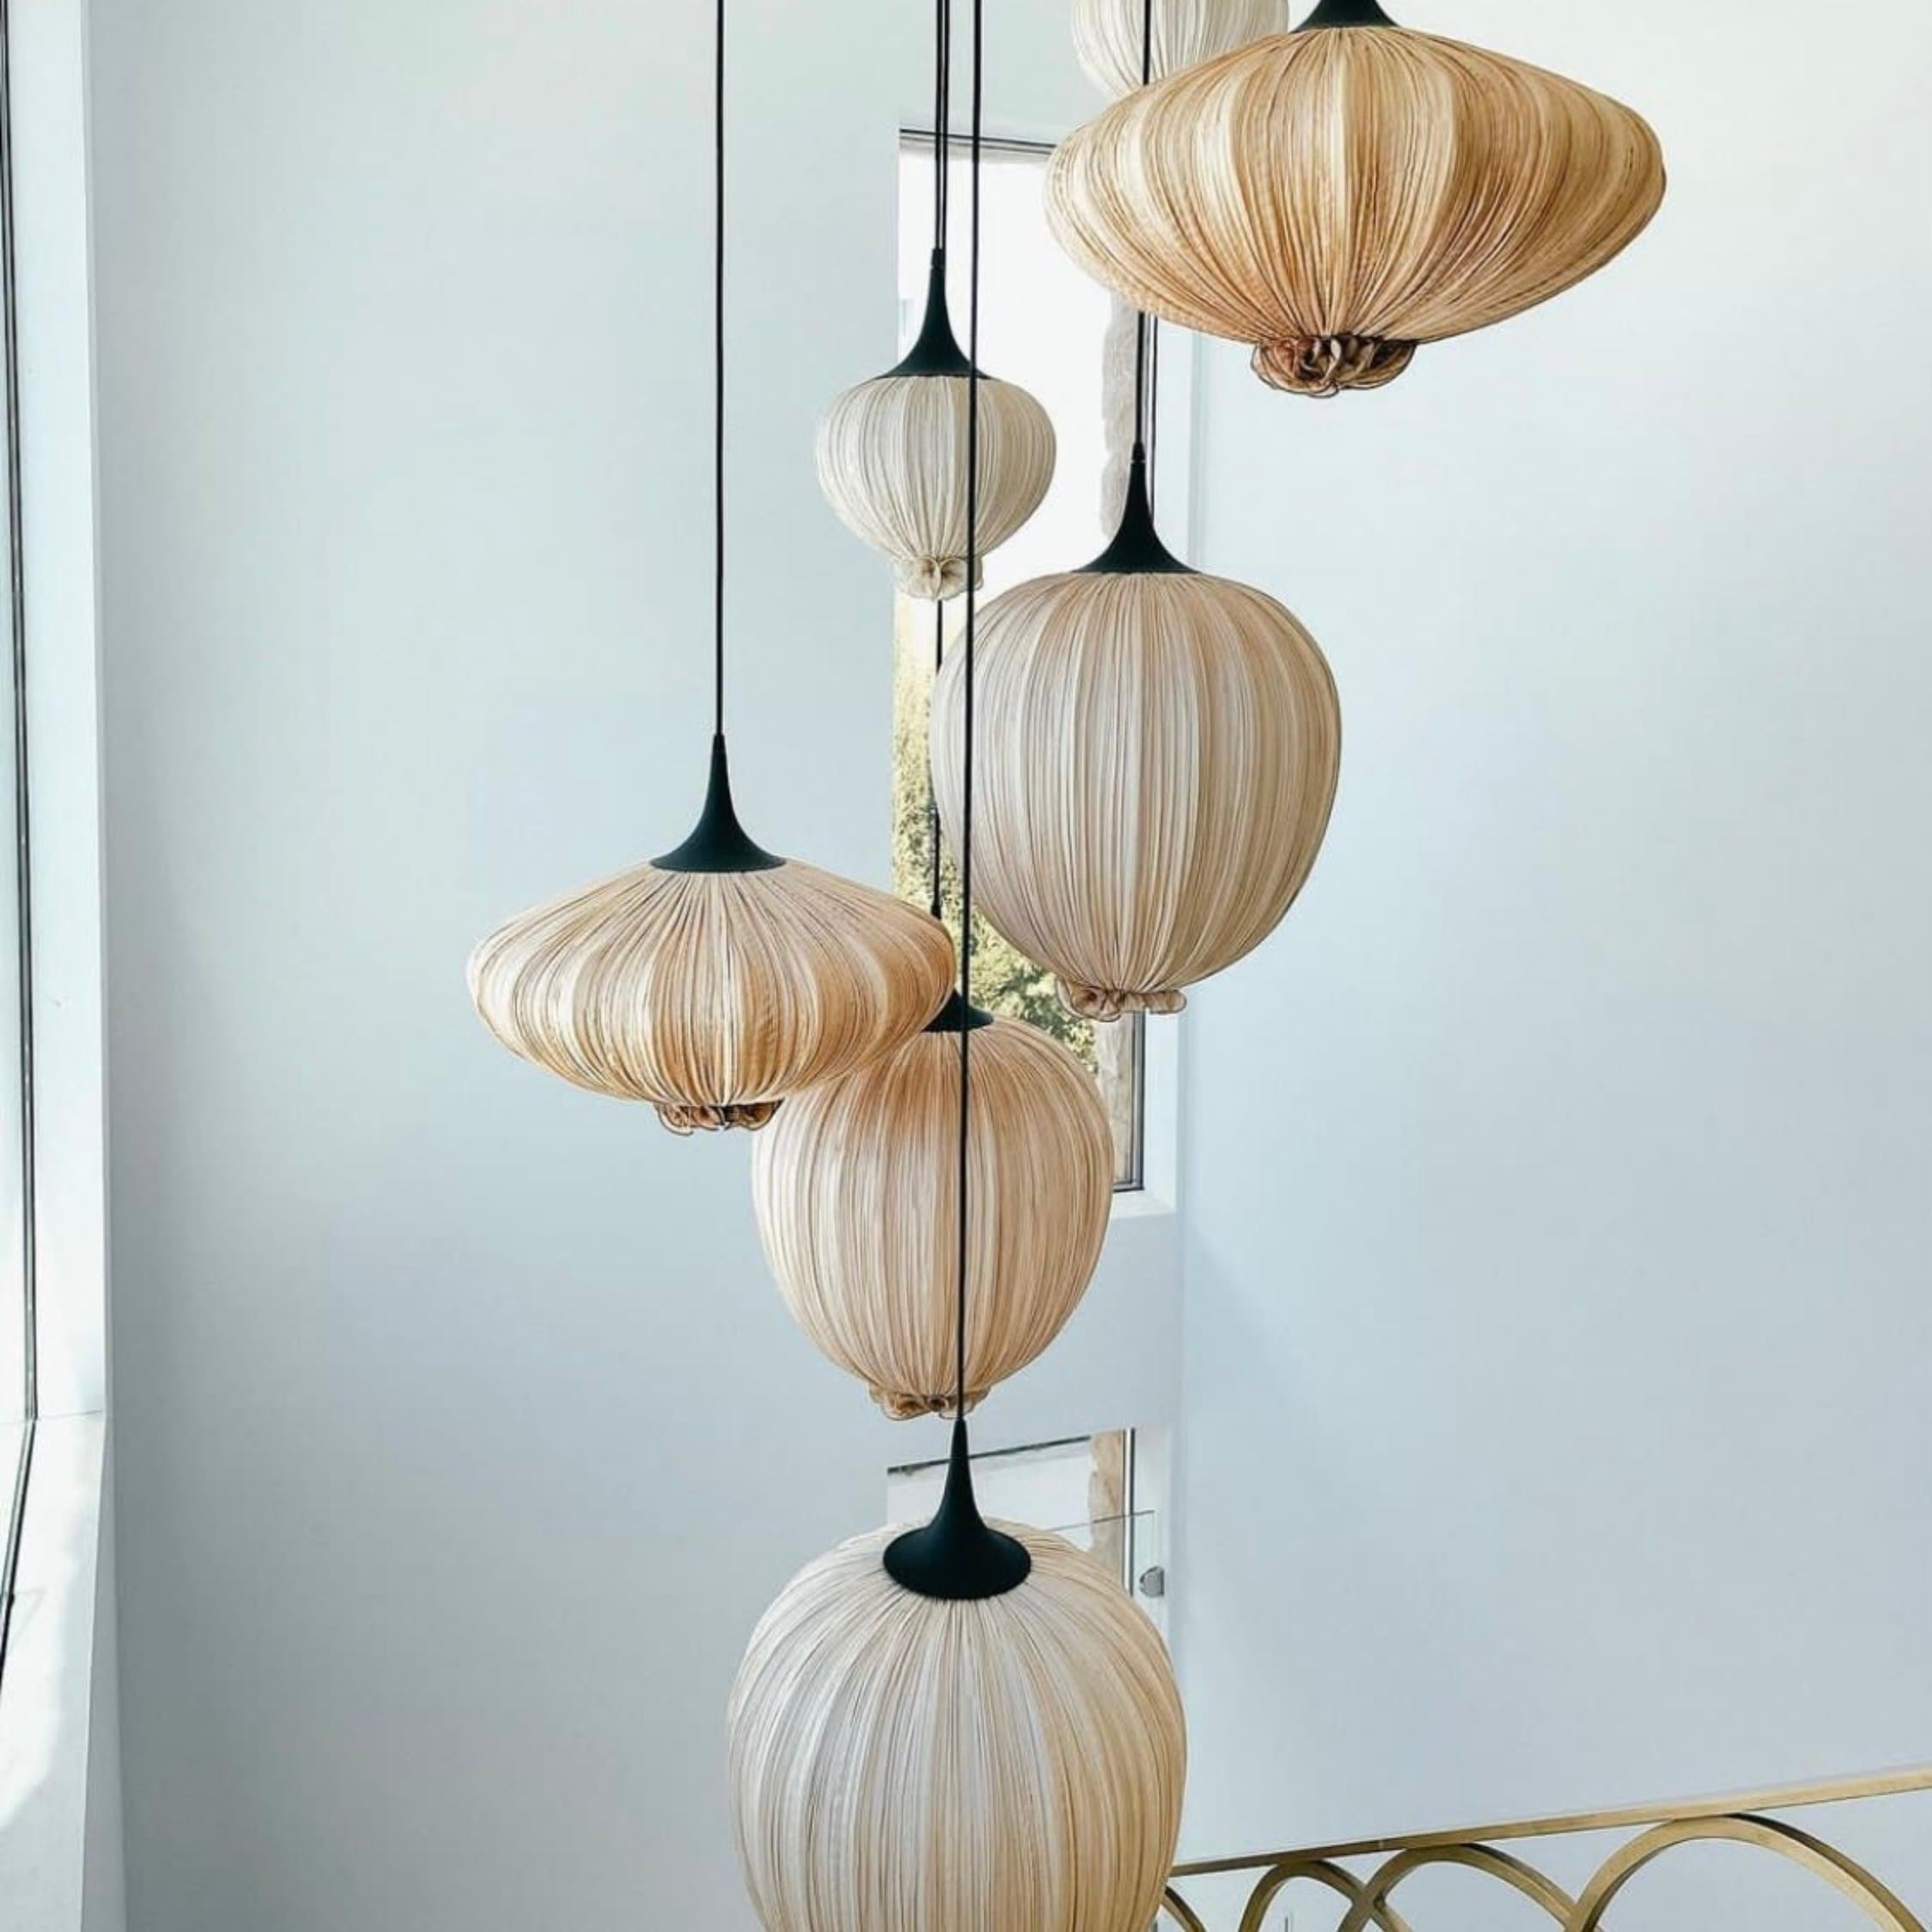 Orb shaped pendant light hand made by hand form crushed silk on metal.